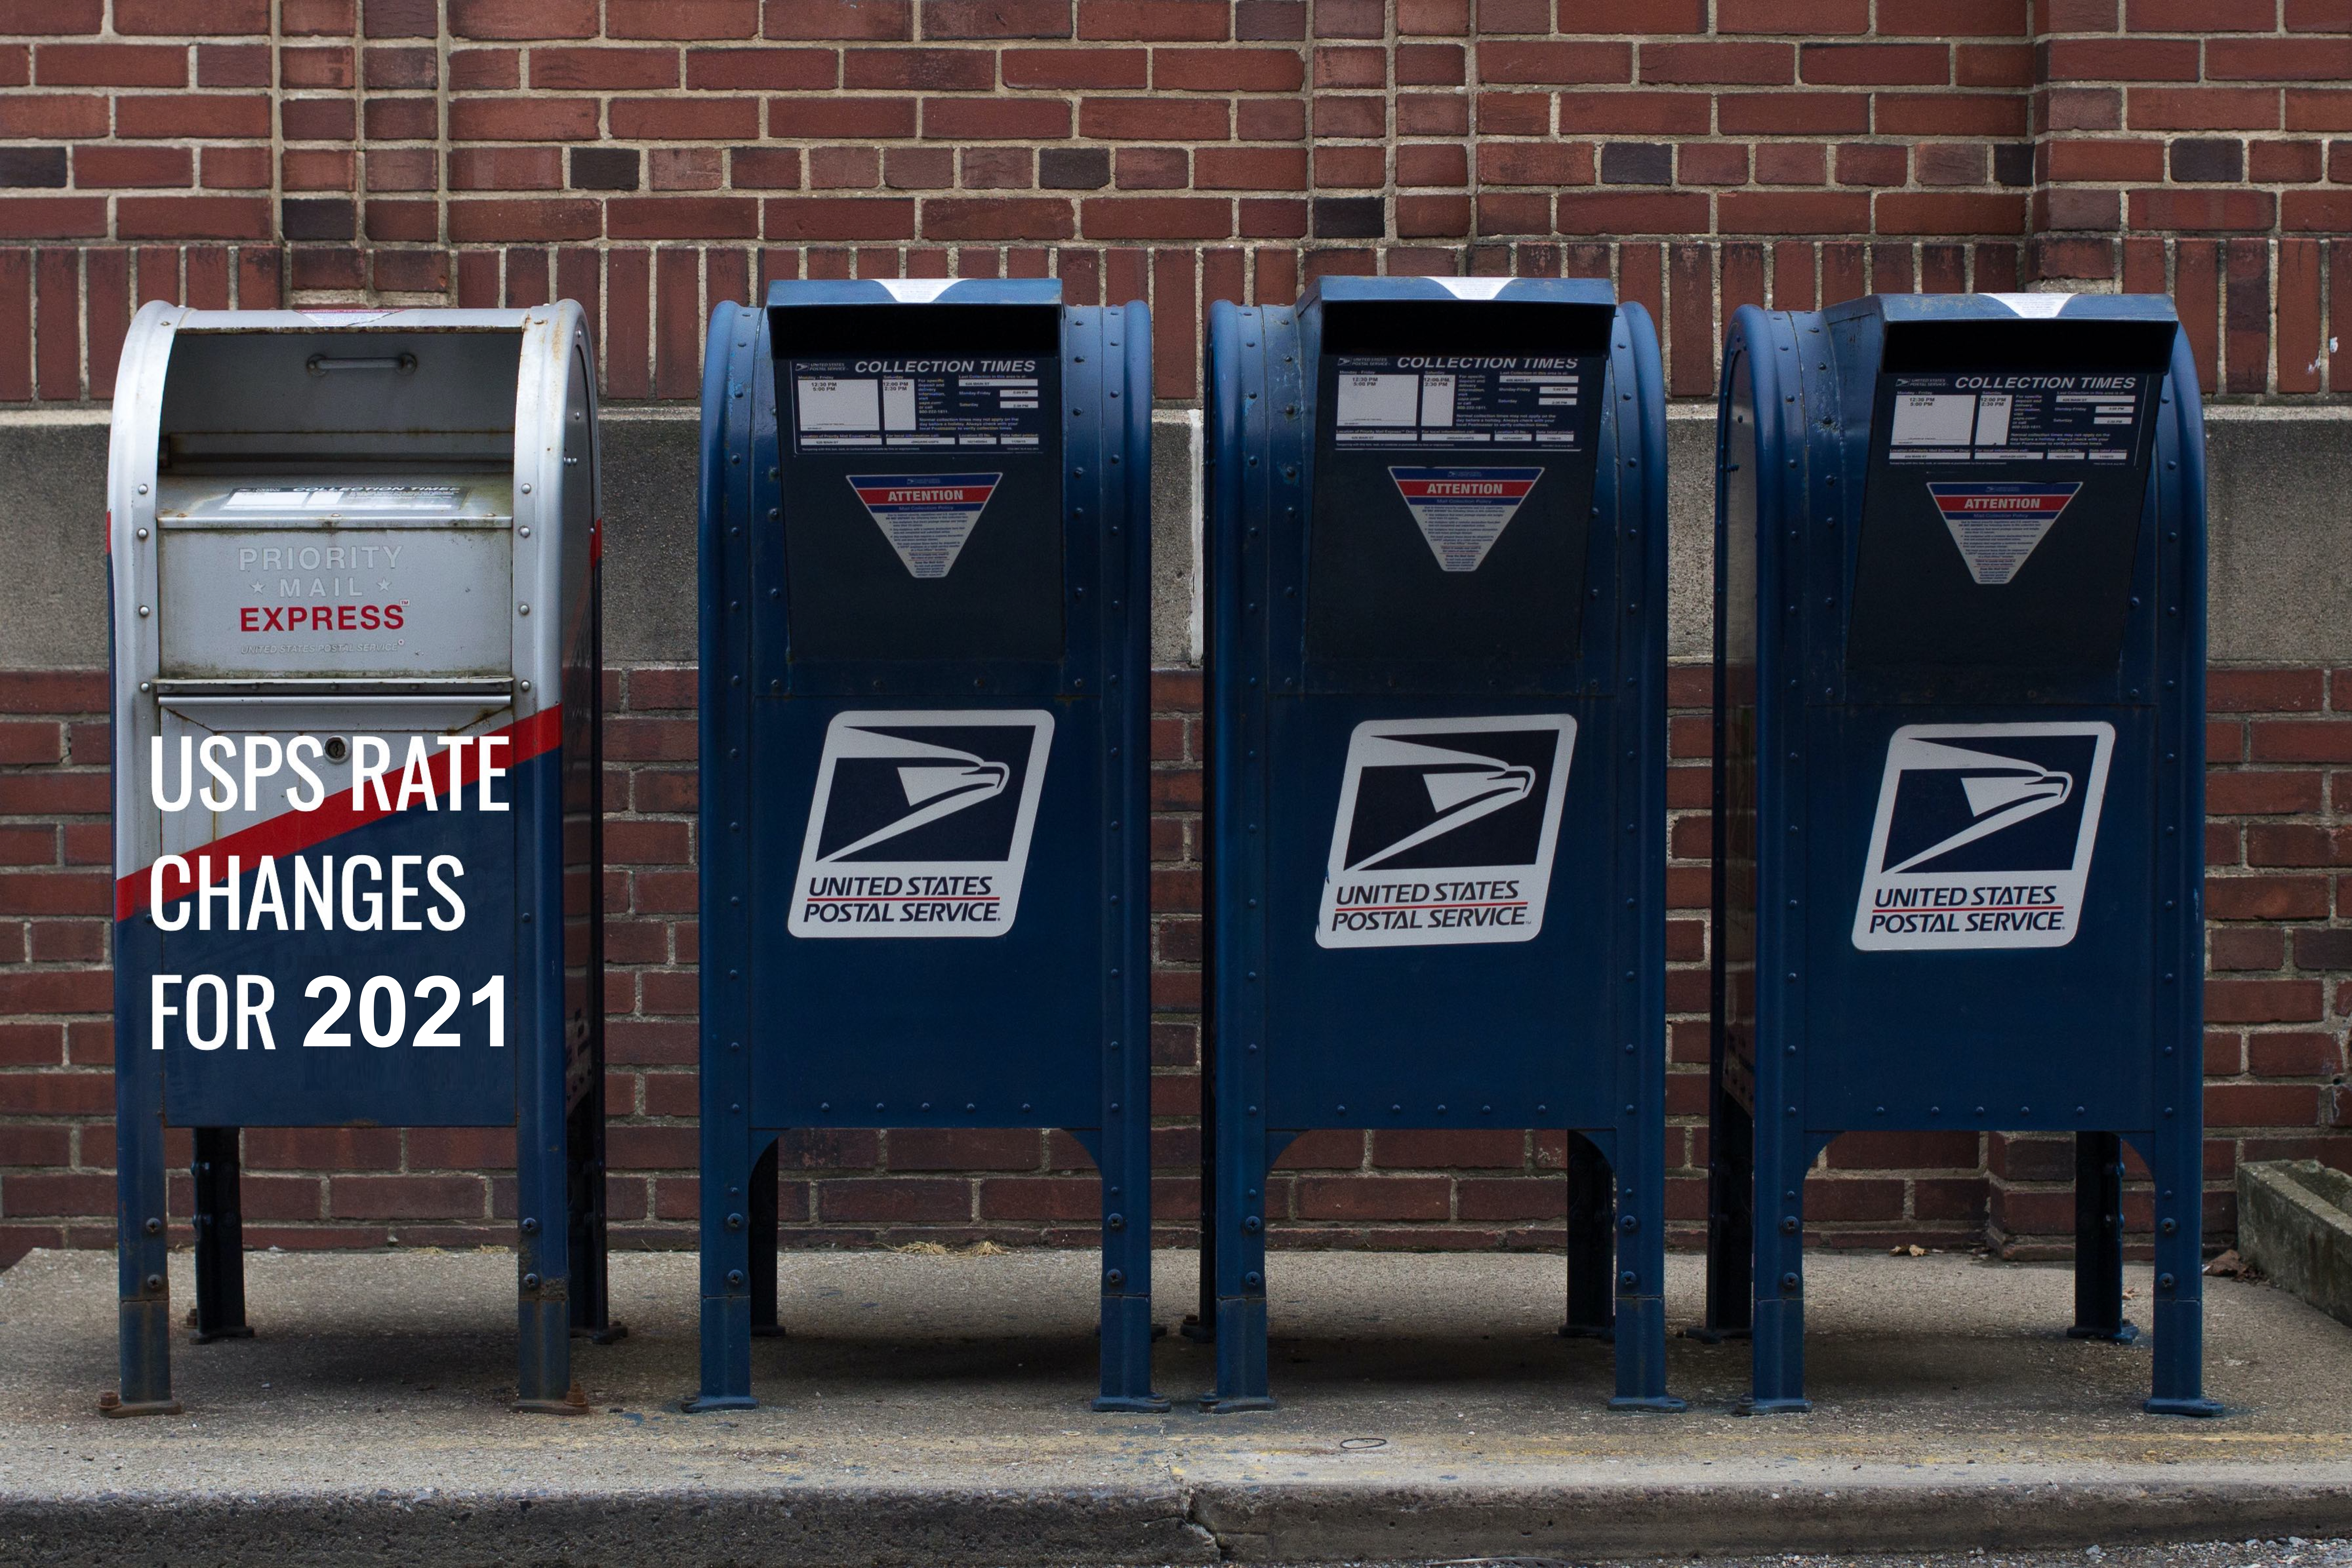 USPS Rate Changes for 2020 medium quality